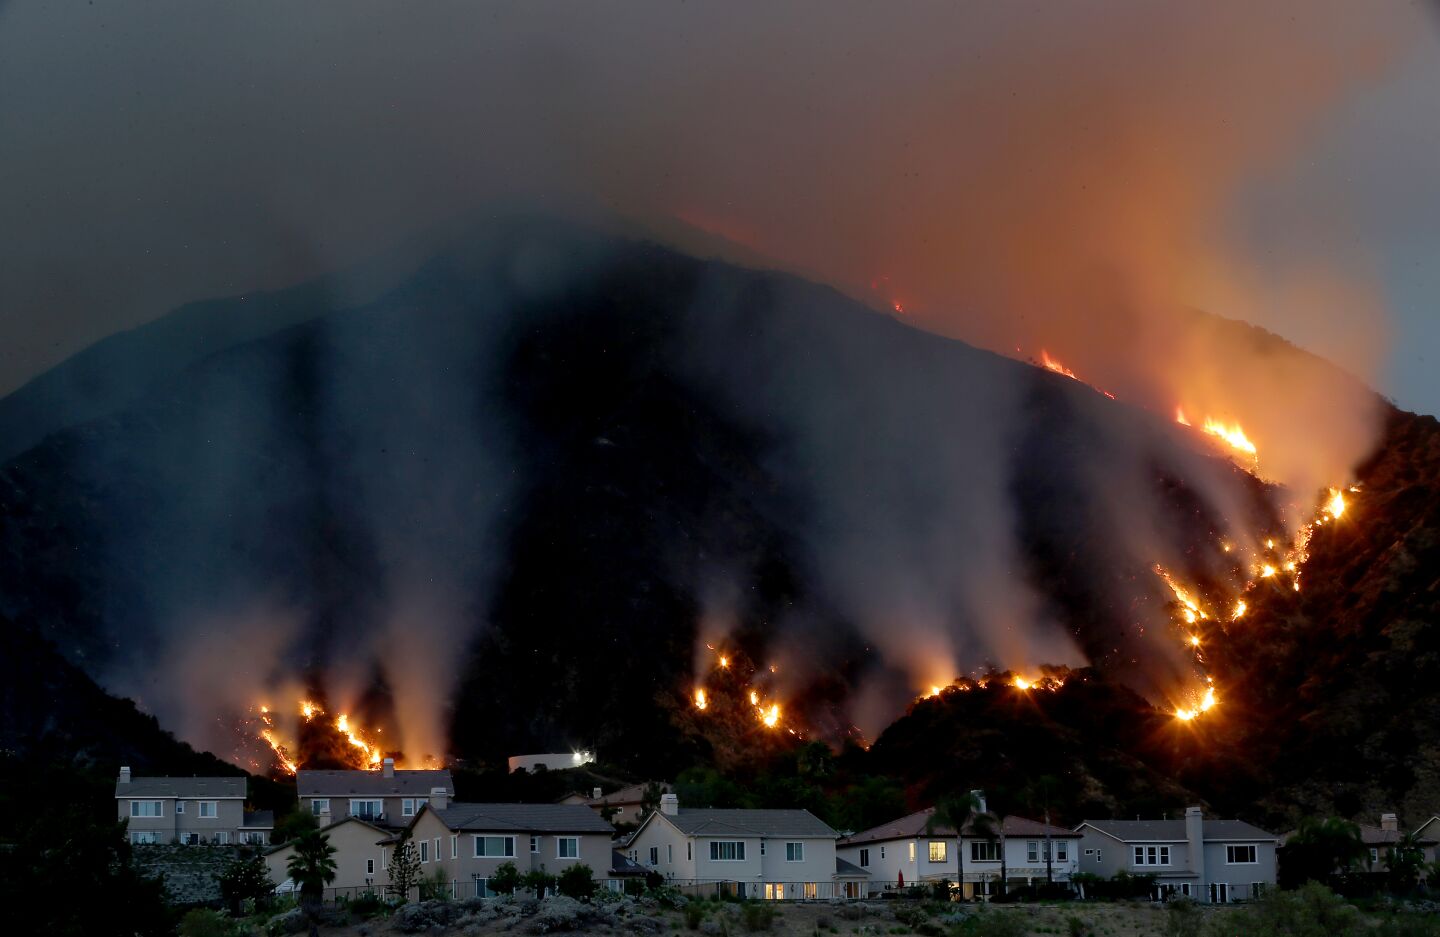 The Ranch fire burns in the hills above a cluster of homes along the San Gabriel River.